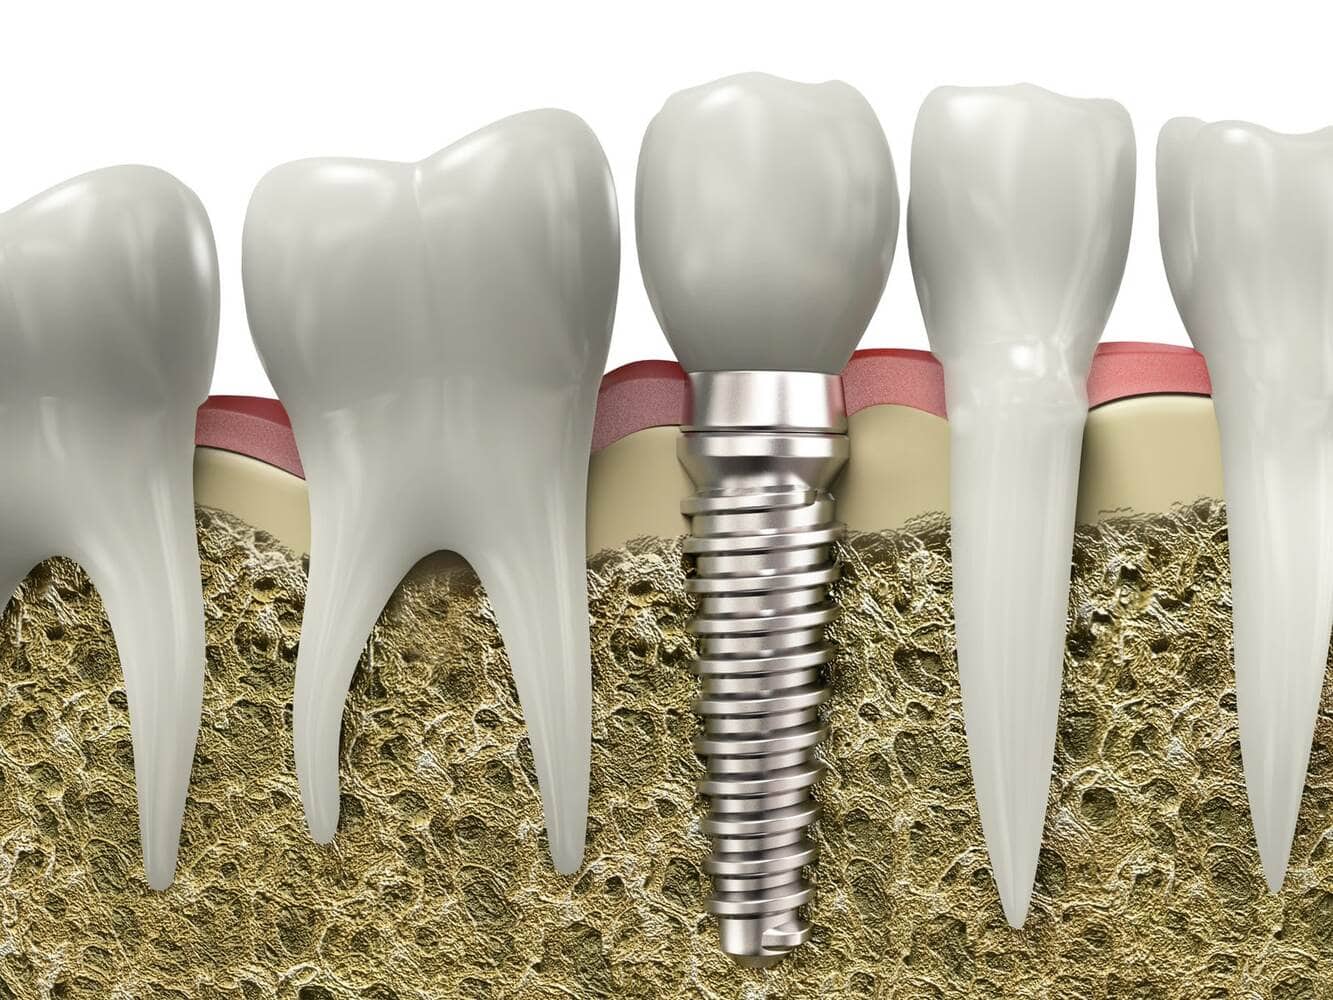 who are the right candidates for dental implants